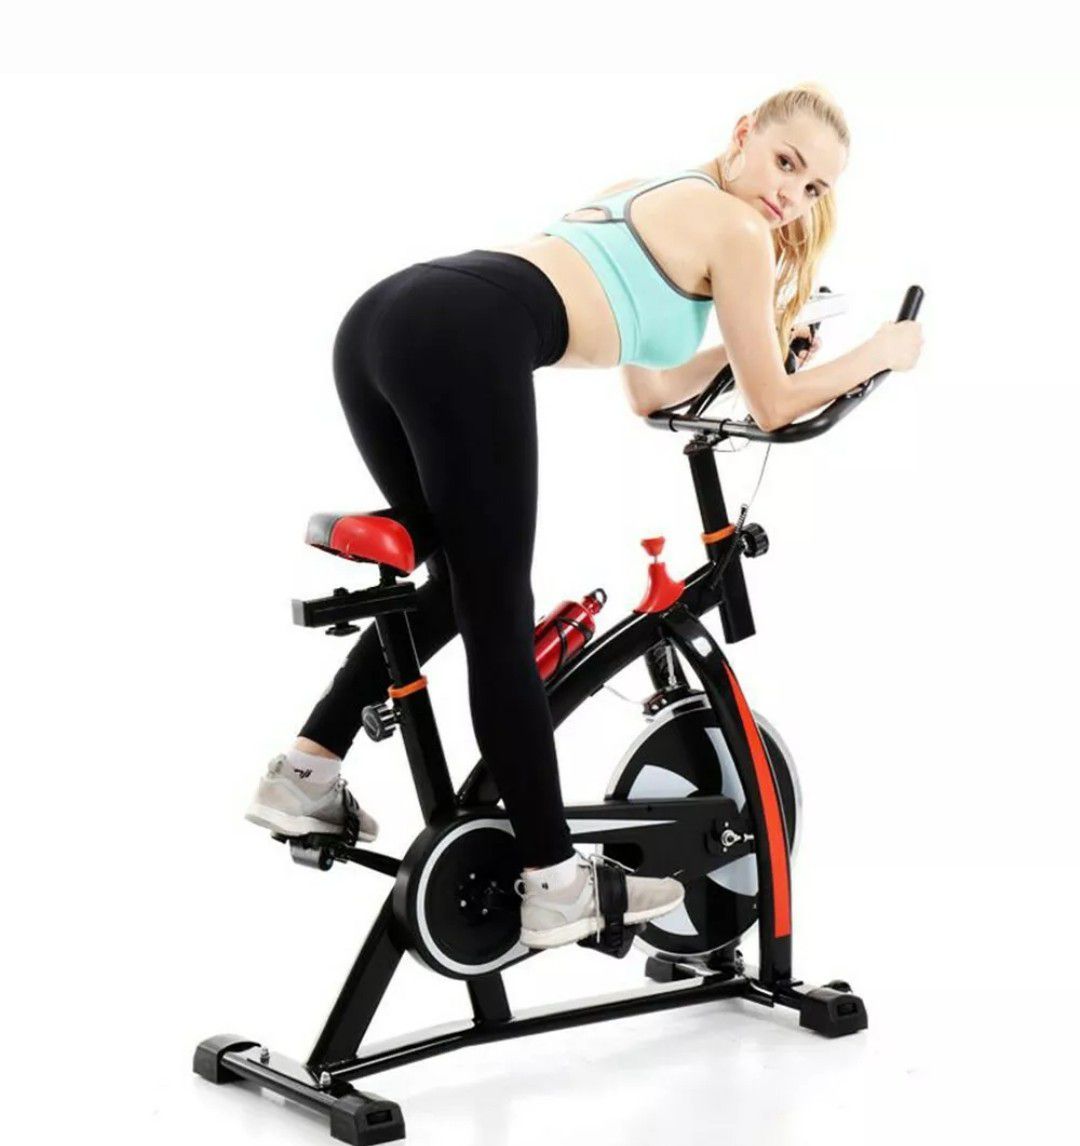 Brand New 2019 Spinning Bike | Only One day shipping